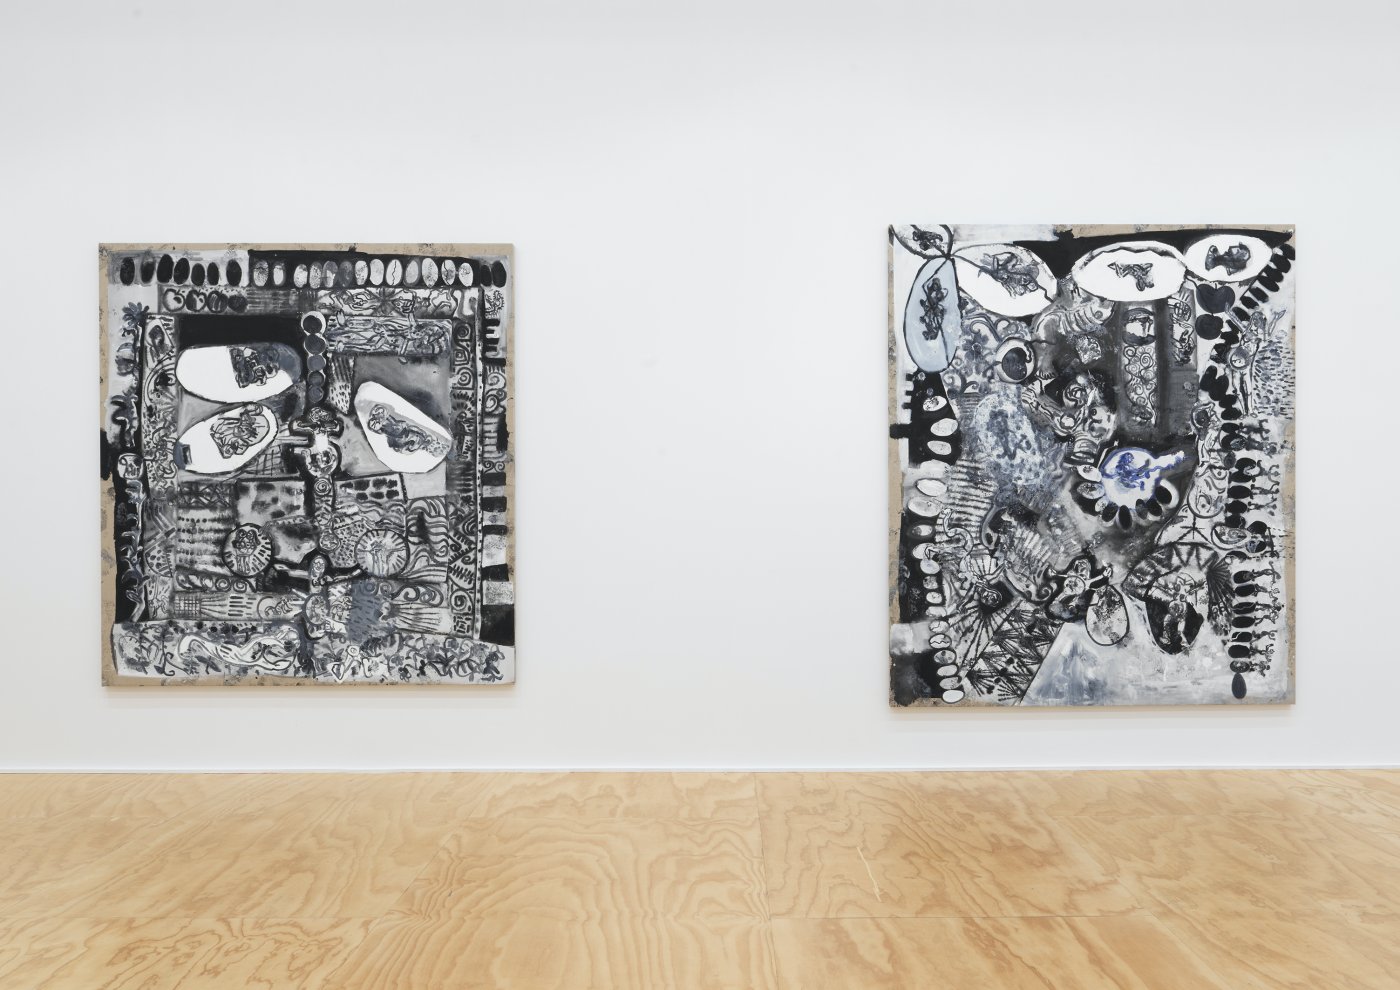 Installation image for Tobias Pils: 3 paintings 2 drawings 1 triptych, at Galerie Eva Presenhuber